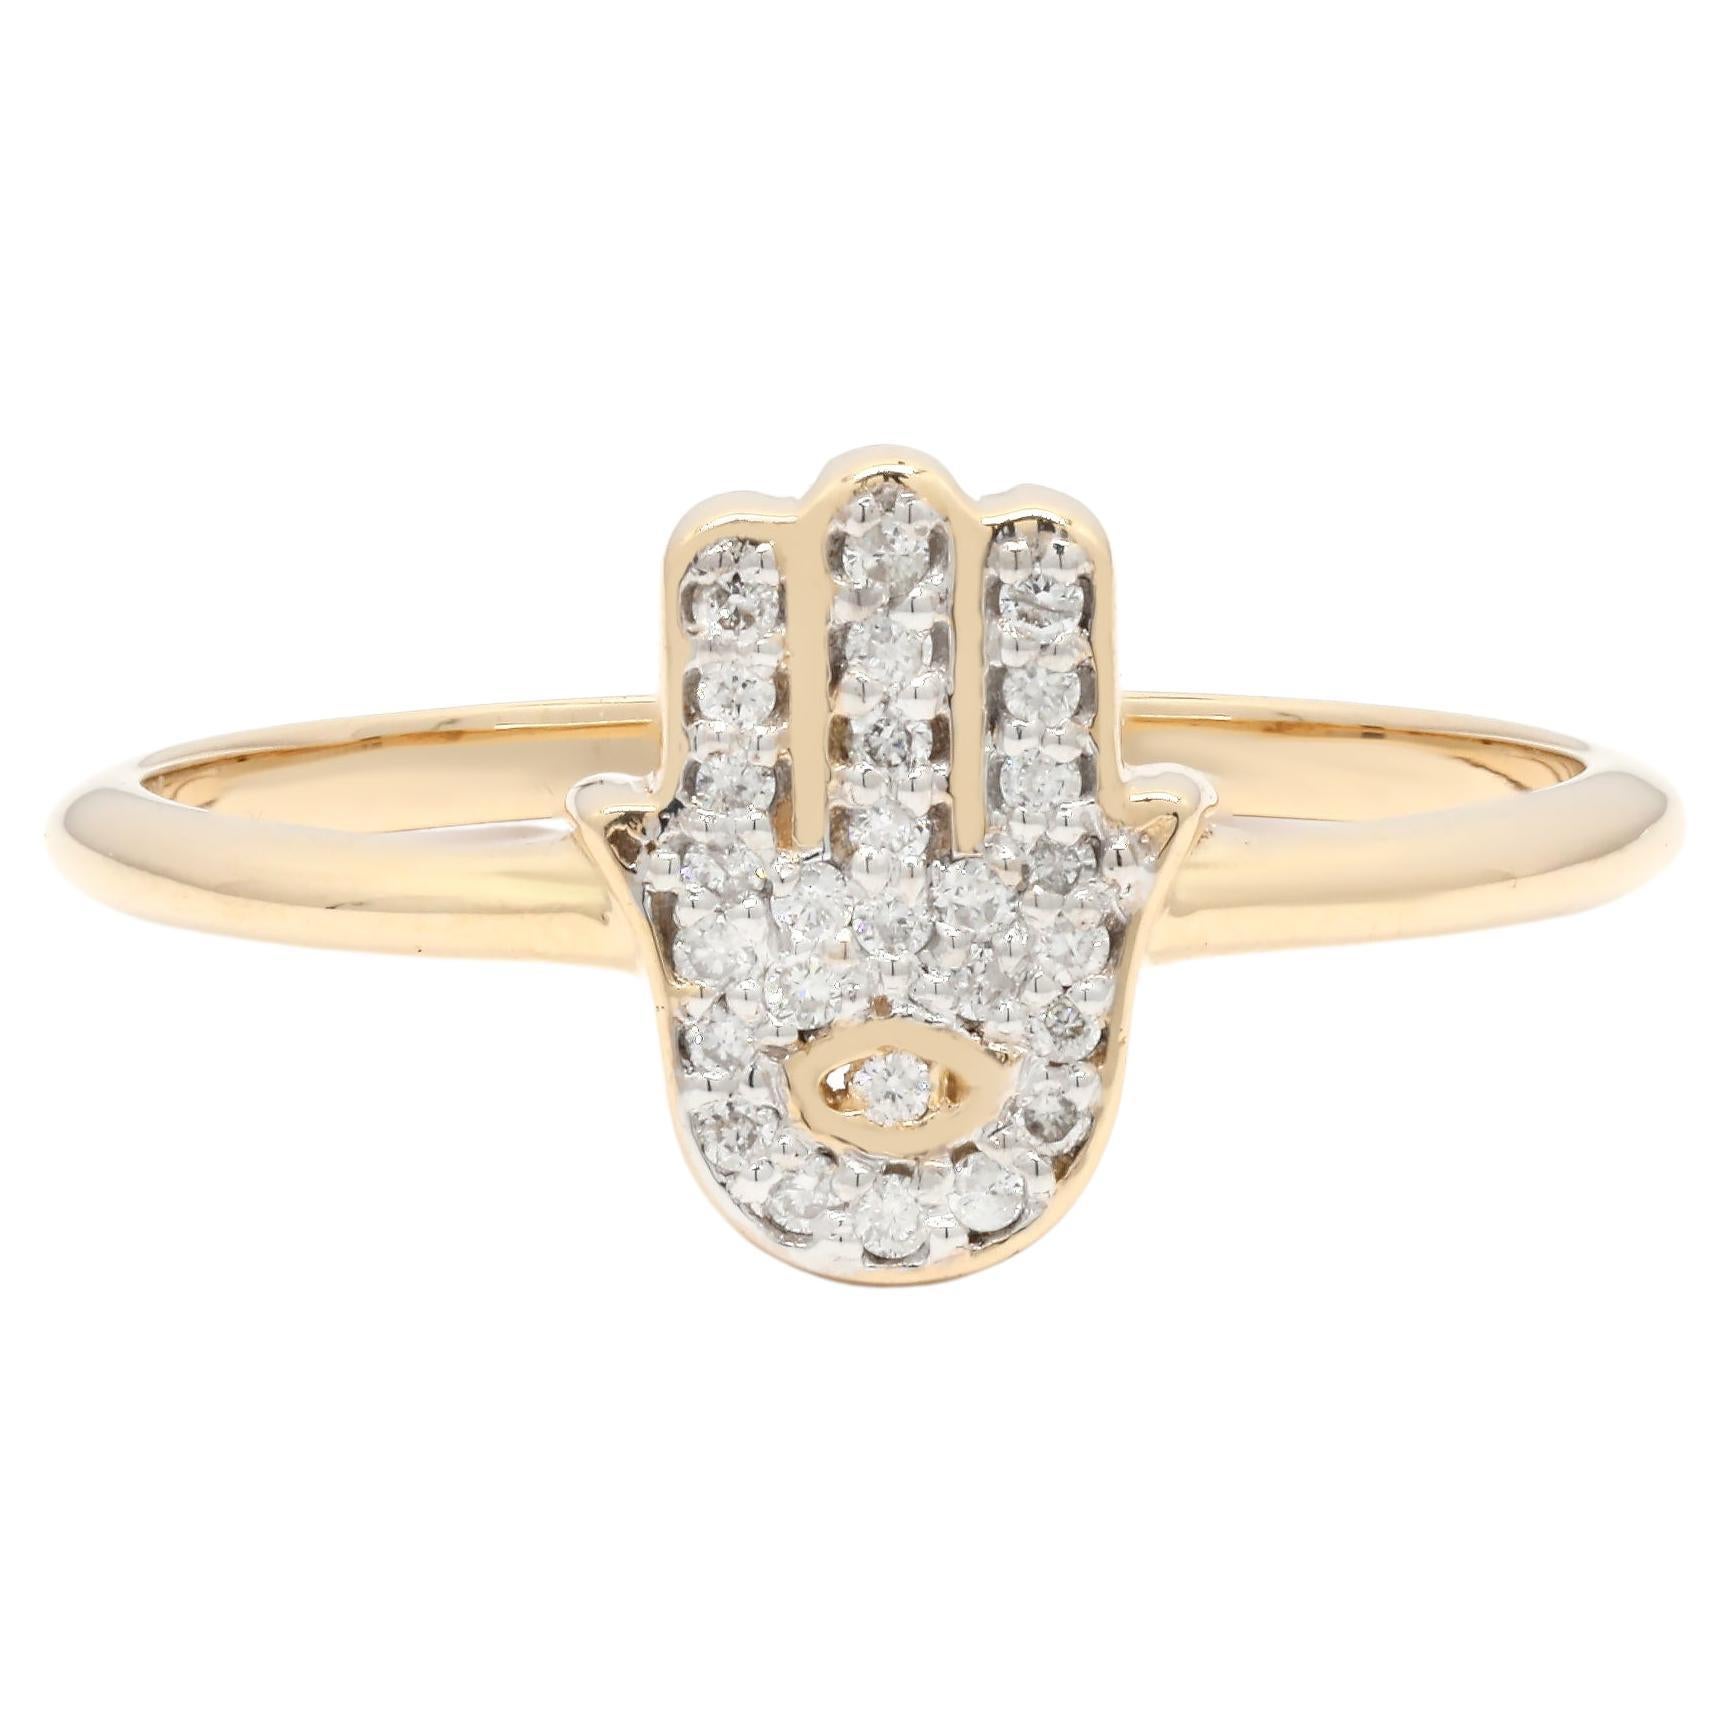 Stacking Hamsa Hand Diamond Ring in 14K Yellow Gold with an Evil Eye